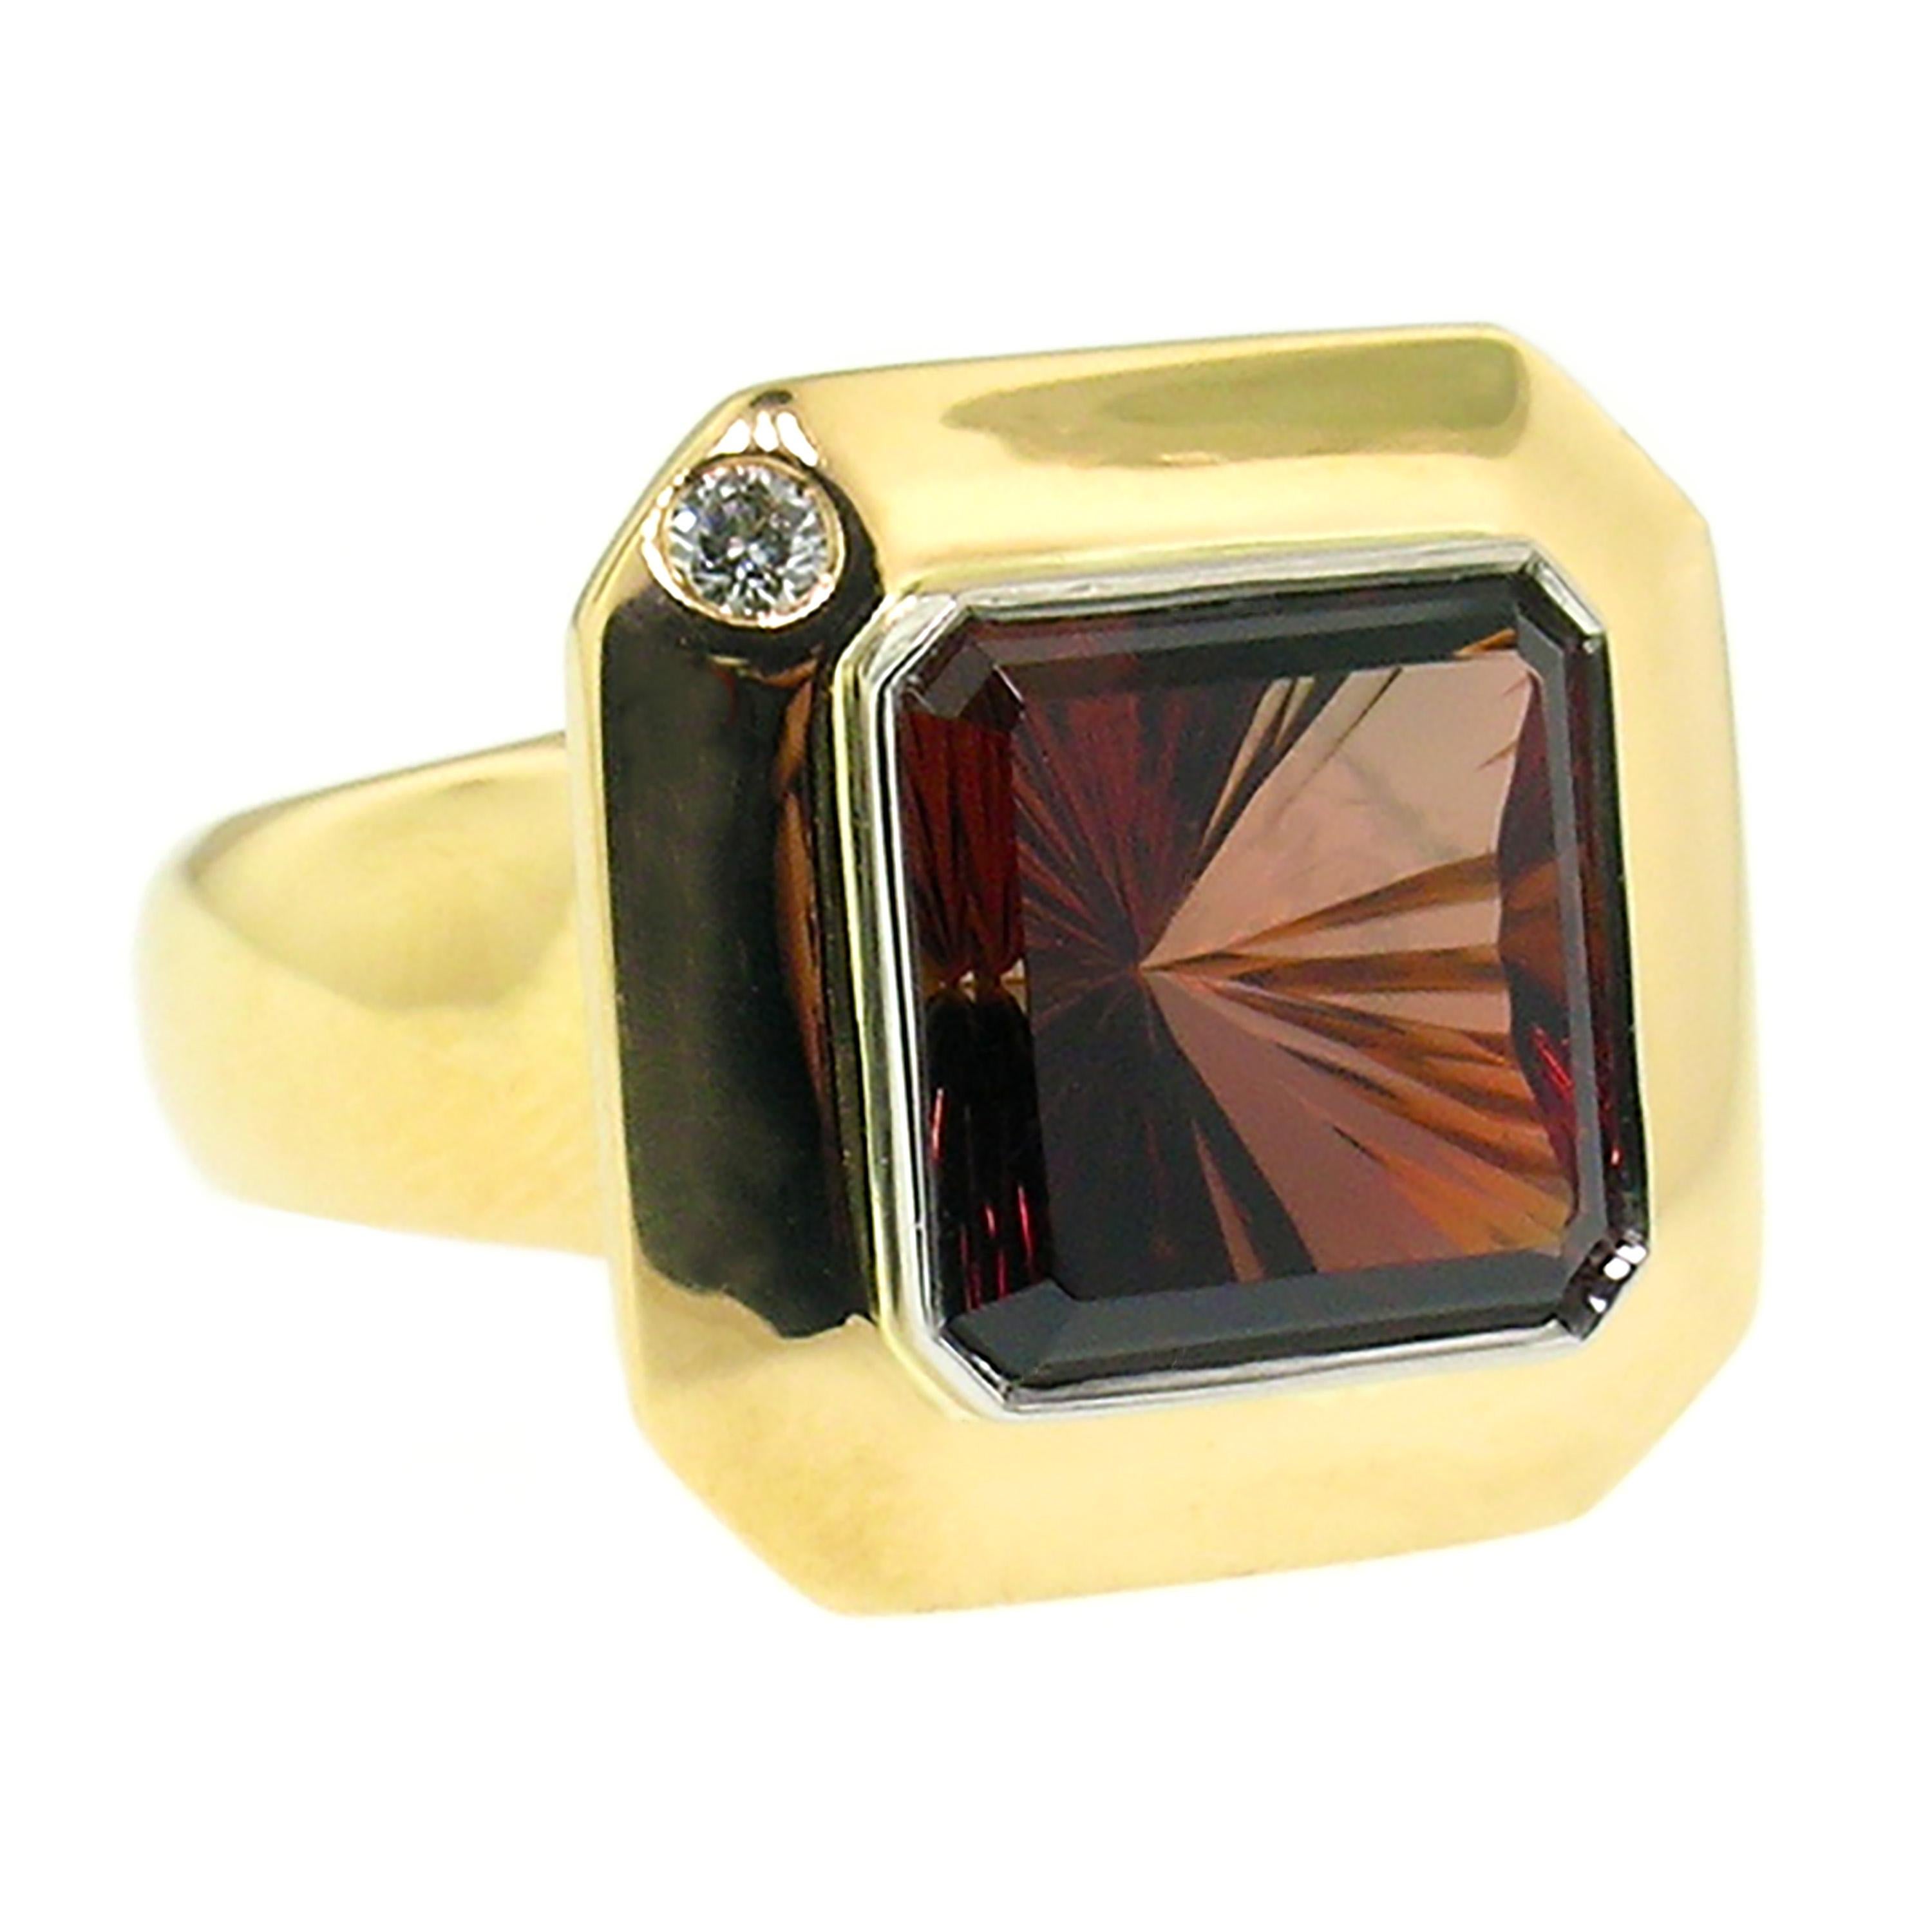 Contemporary 8.43ct Oregon Sunstone, Diamond, 18kt and Platinum Ring by Cynthia Scott Jewelry For Sale